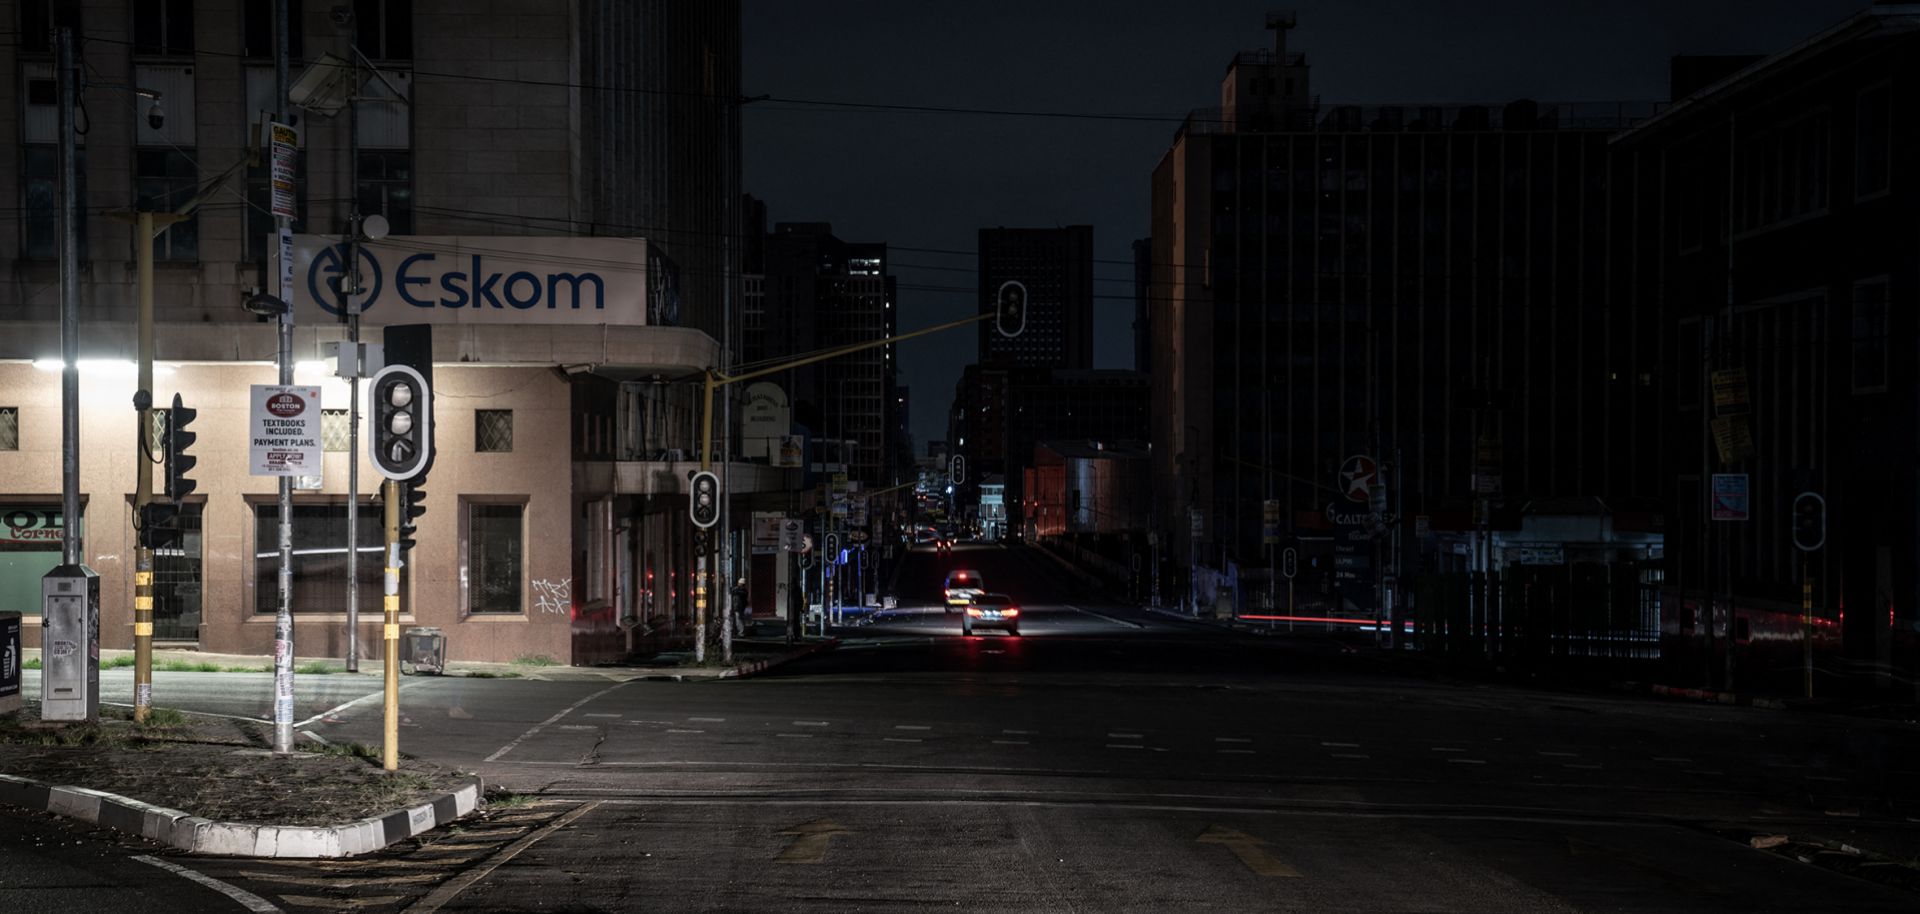 An illuminated Eskom sign is seen outside the power utility's regional office in Johannesburg, South Africa, during load-shedding (i.e. a rolling blackout) on Jan. 31, 2023.